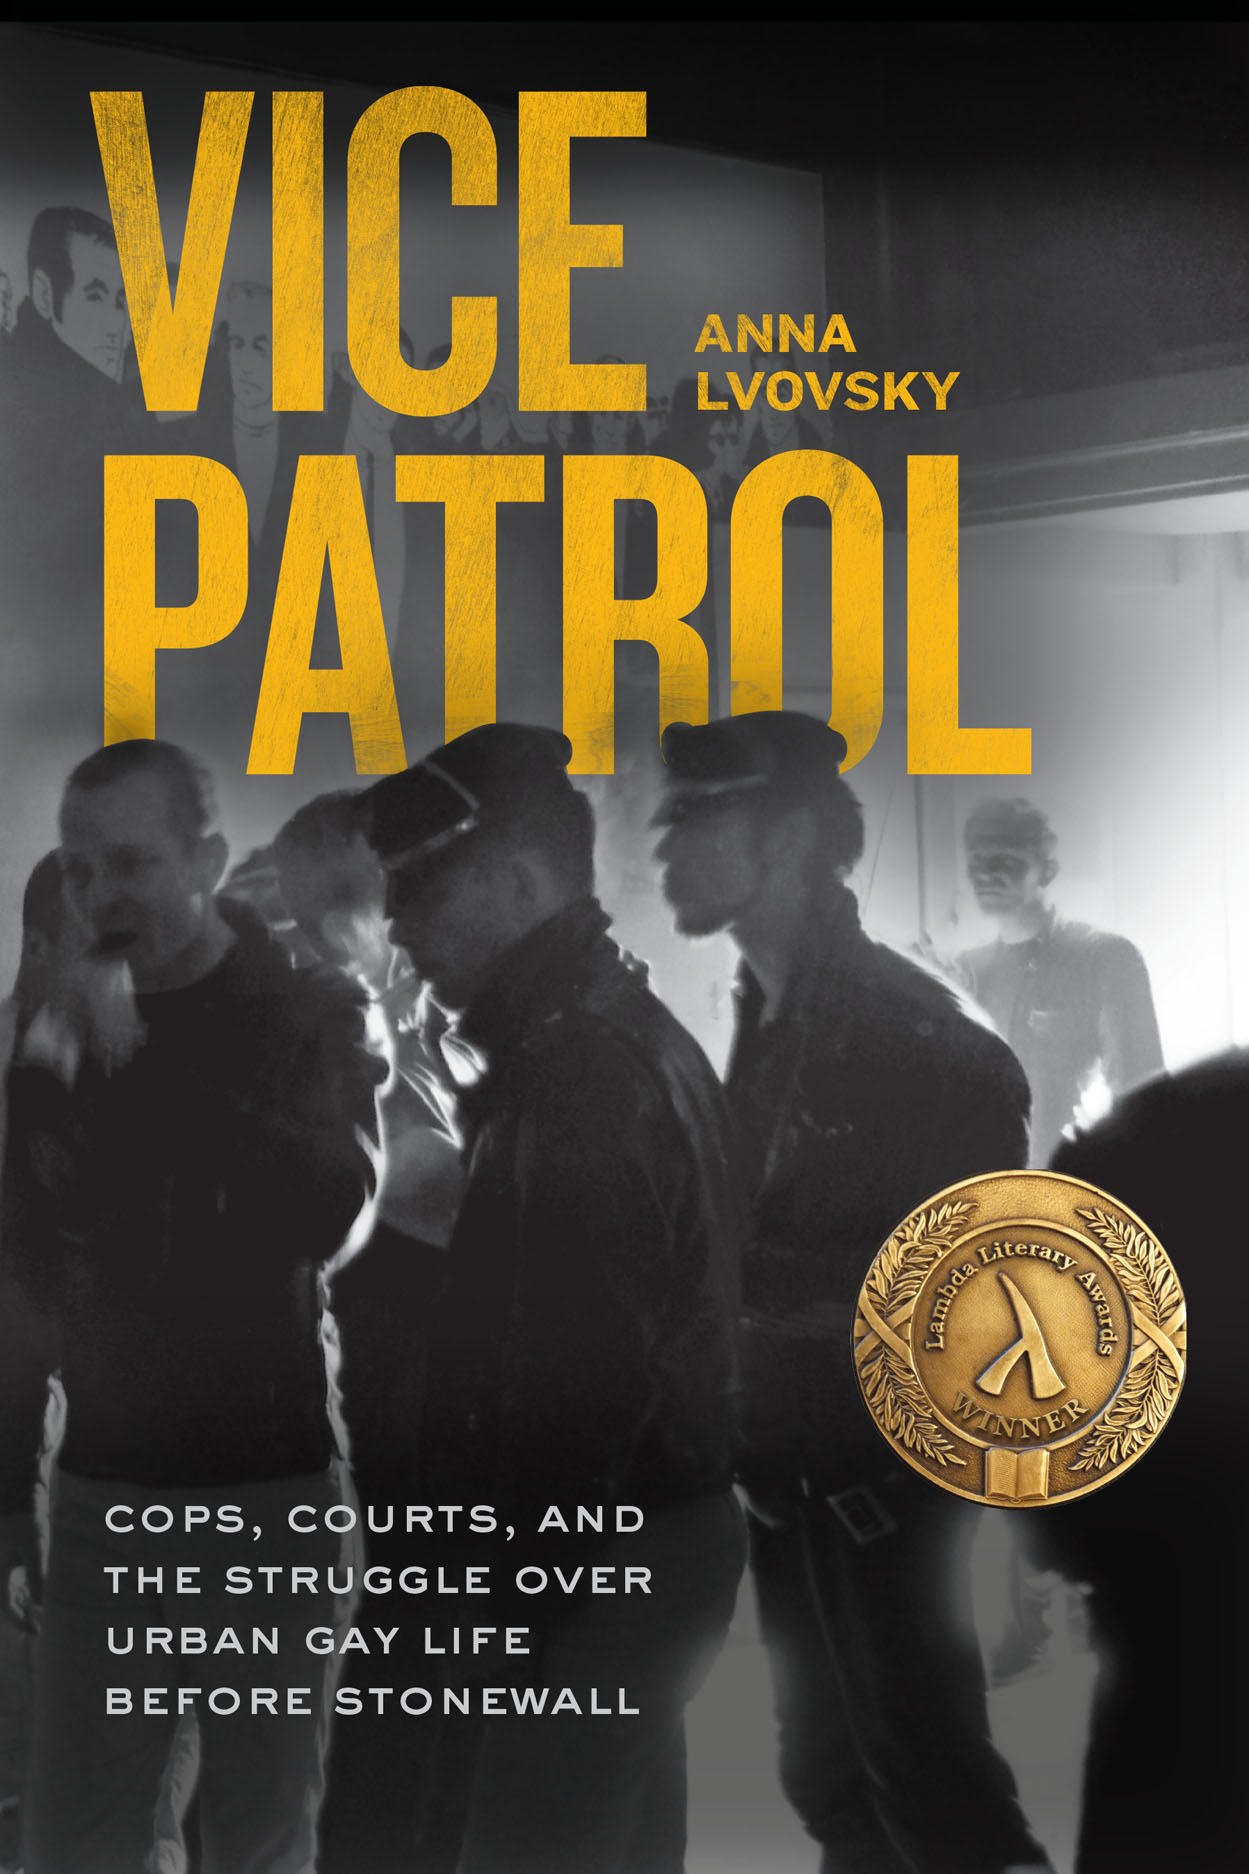 Four Questions with Anna Lvovsky, Author of “Vice Patrol”